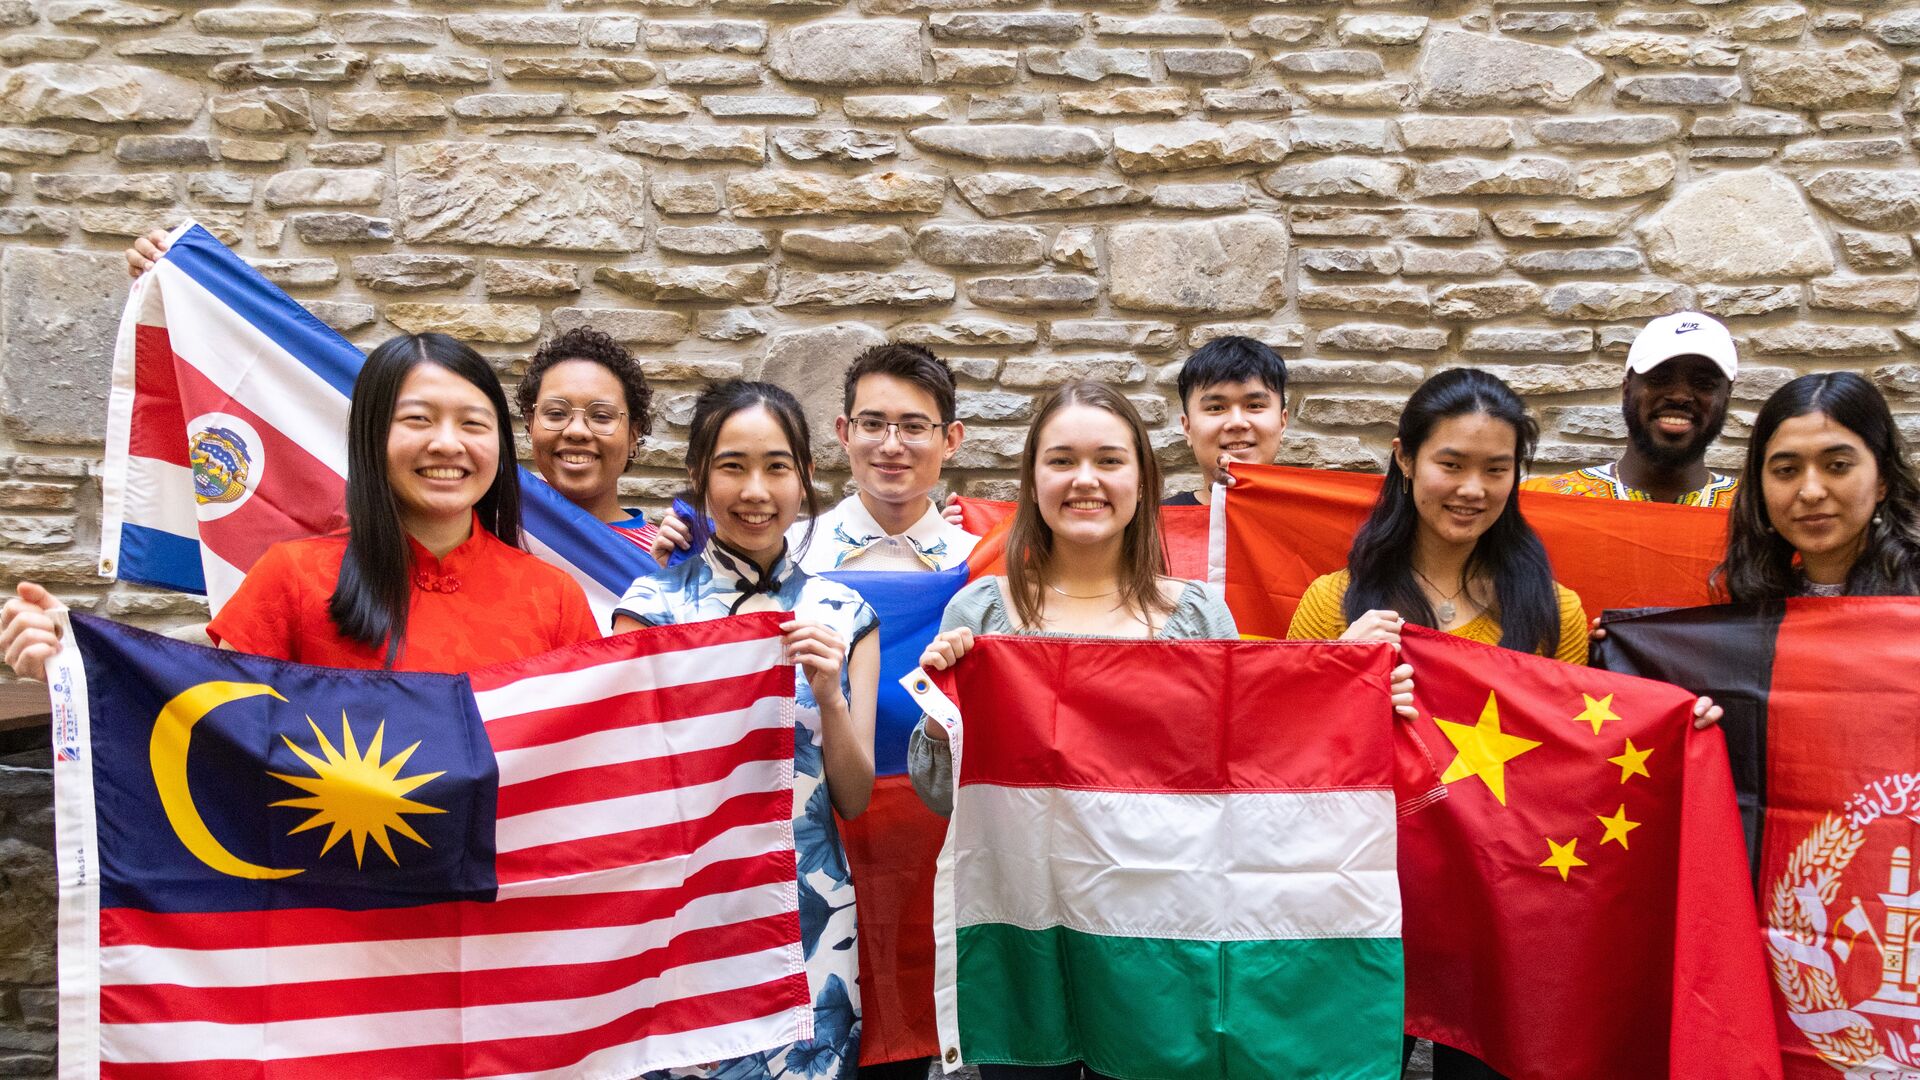 Houghton international students gathered together with flags from their home countries.